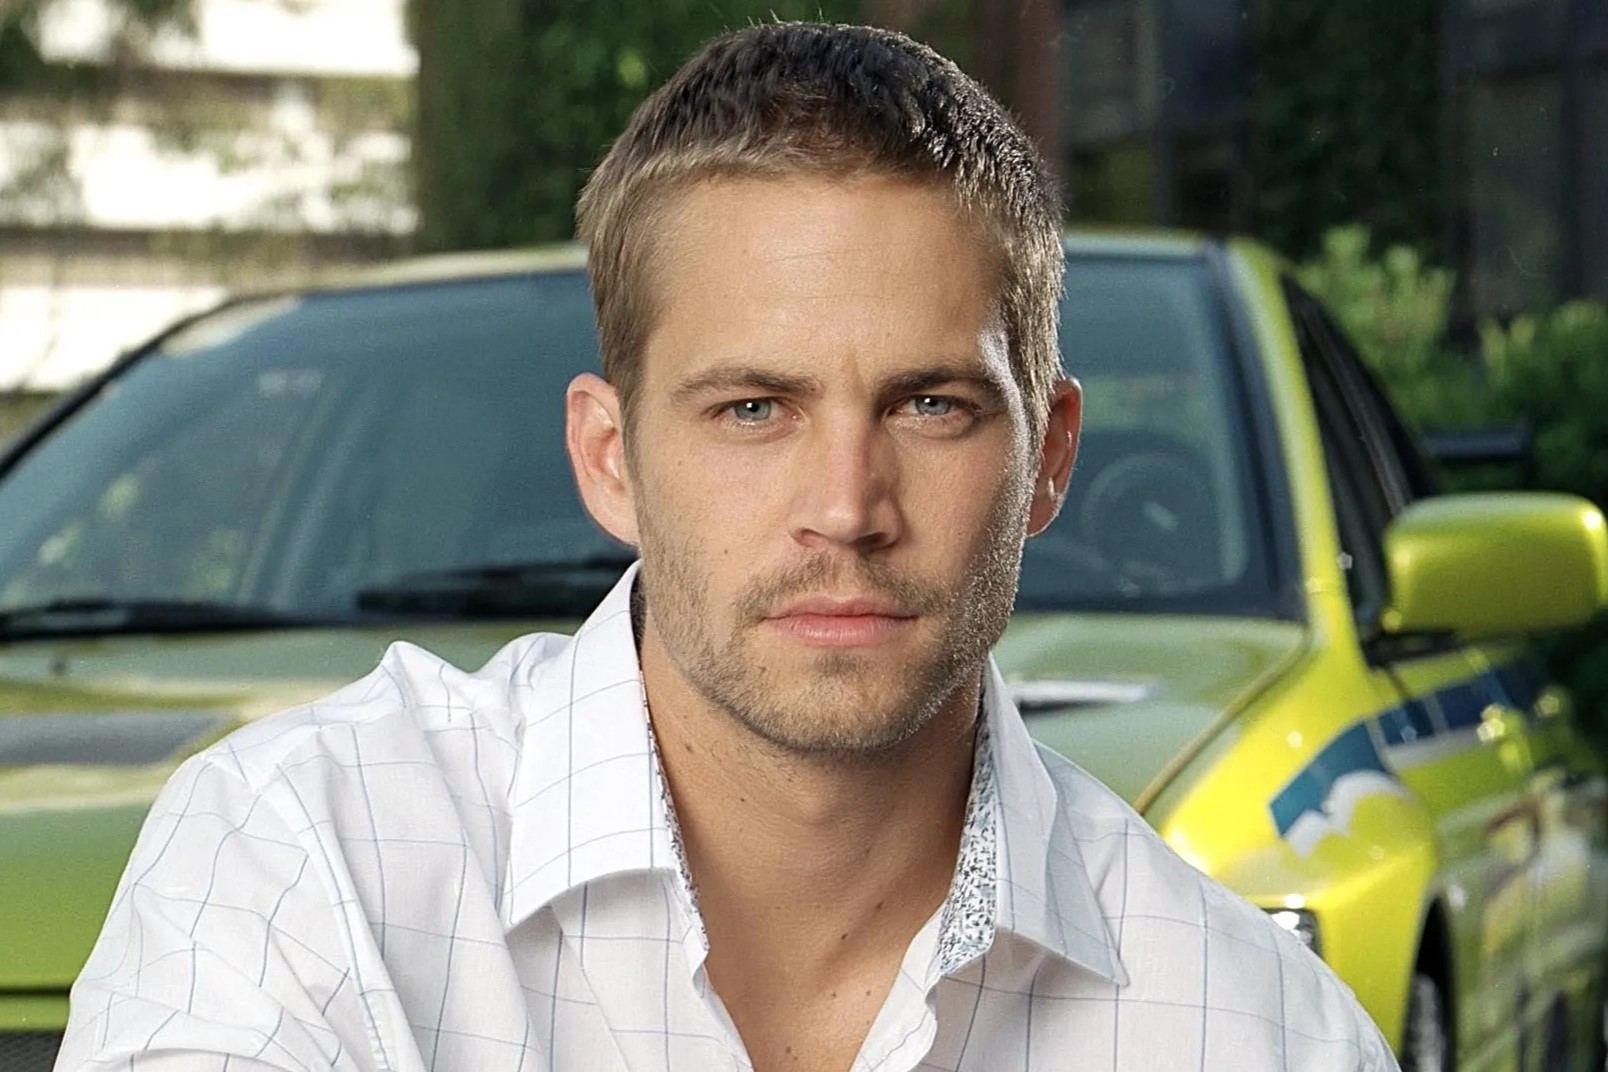 The Shocking Truth Behind Paul Walker's Fatal Accident